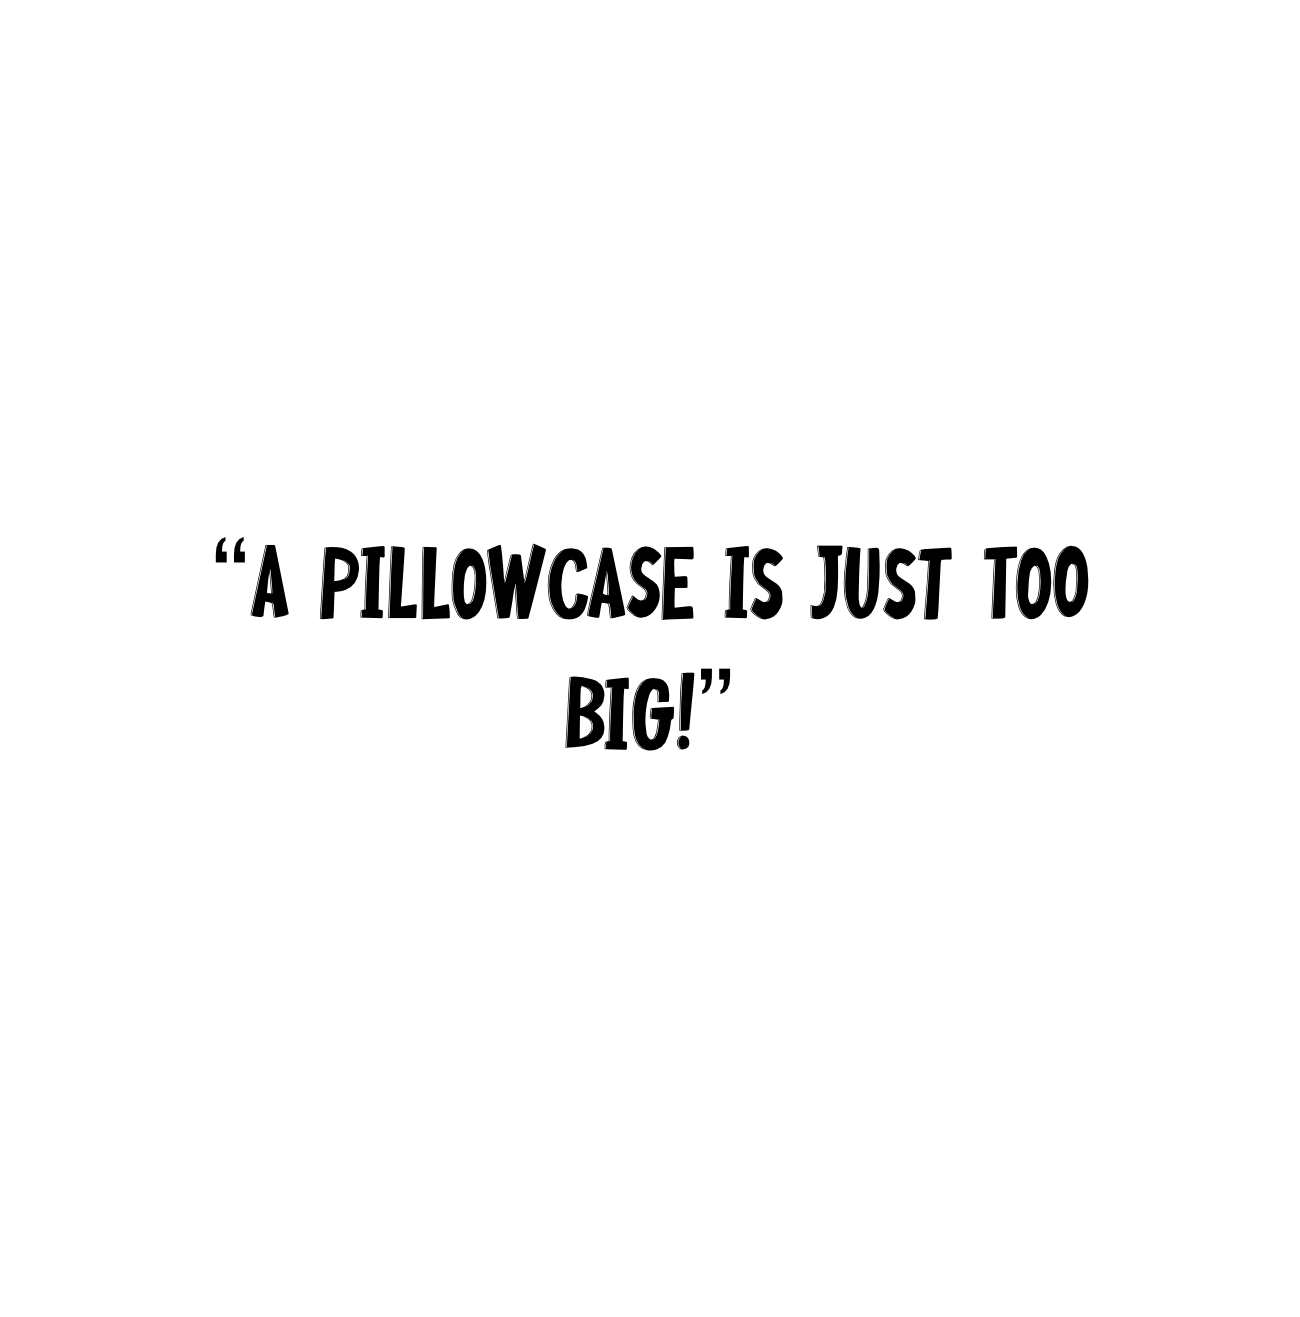 Bedtime Stories for Xmas A Pillowcase Is Just Too Big short Christmas stories for kids page 5